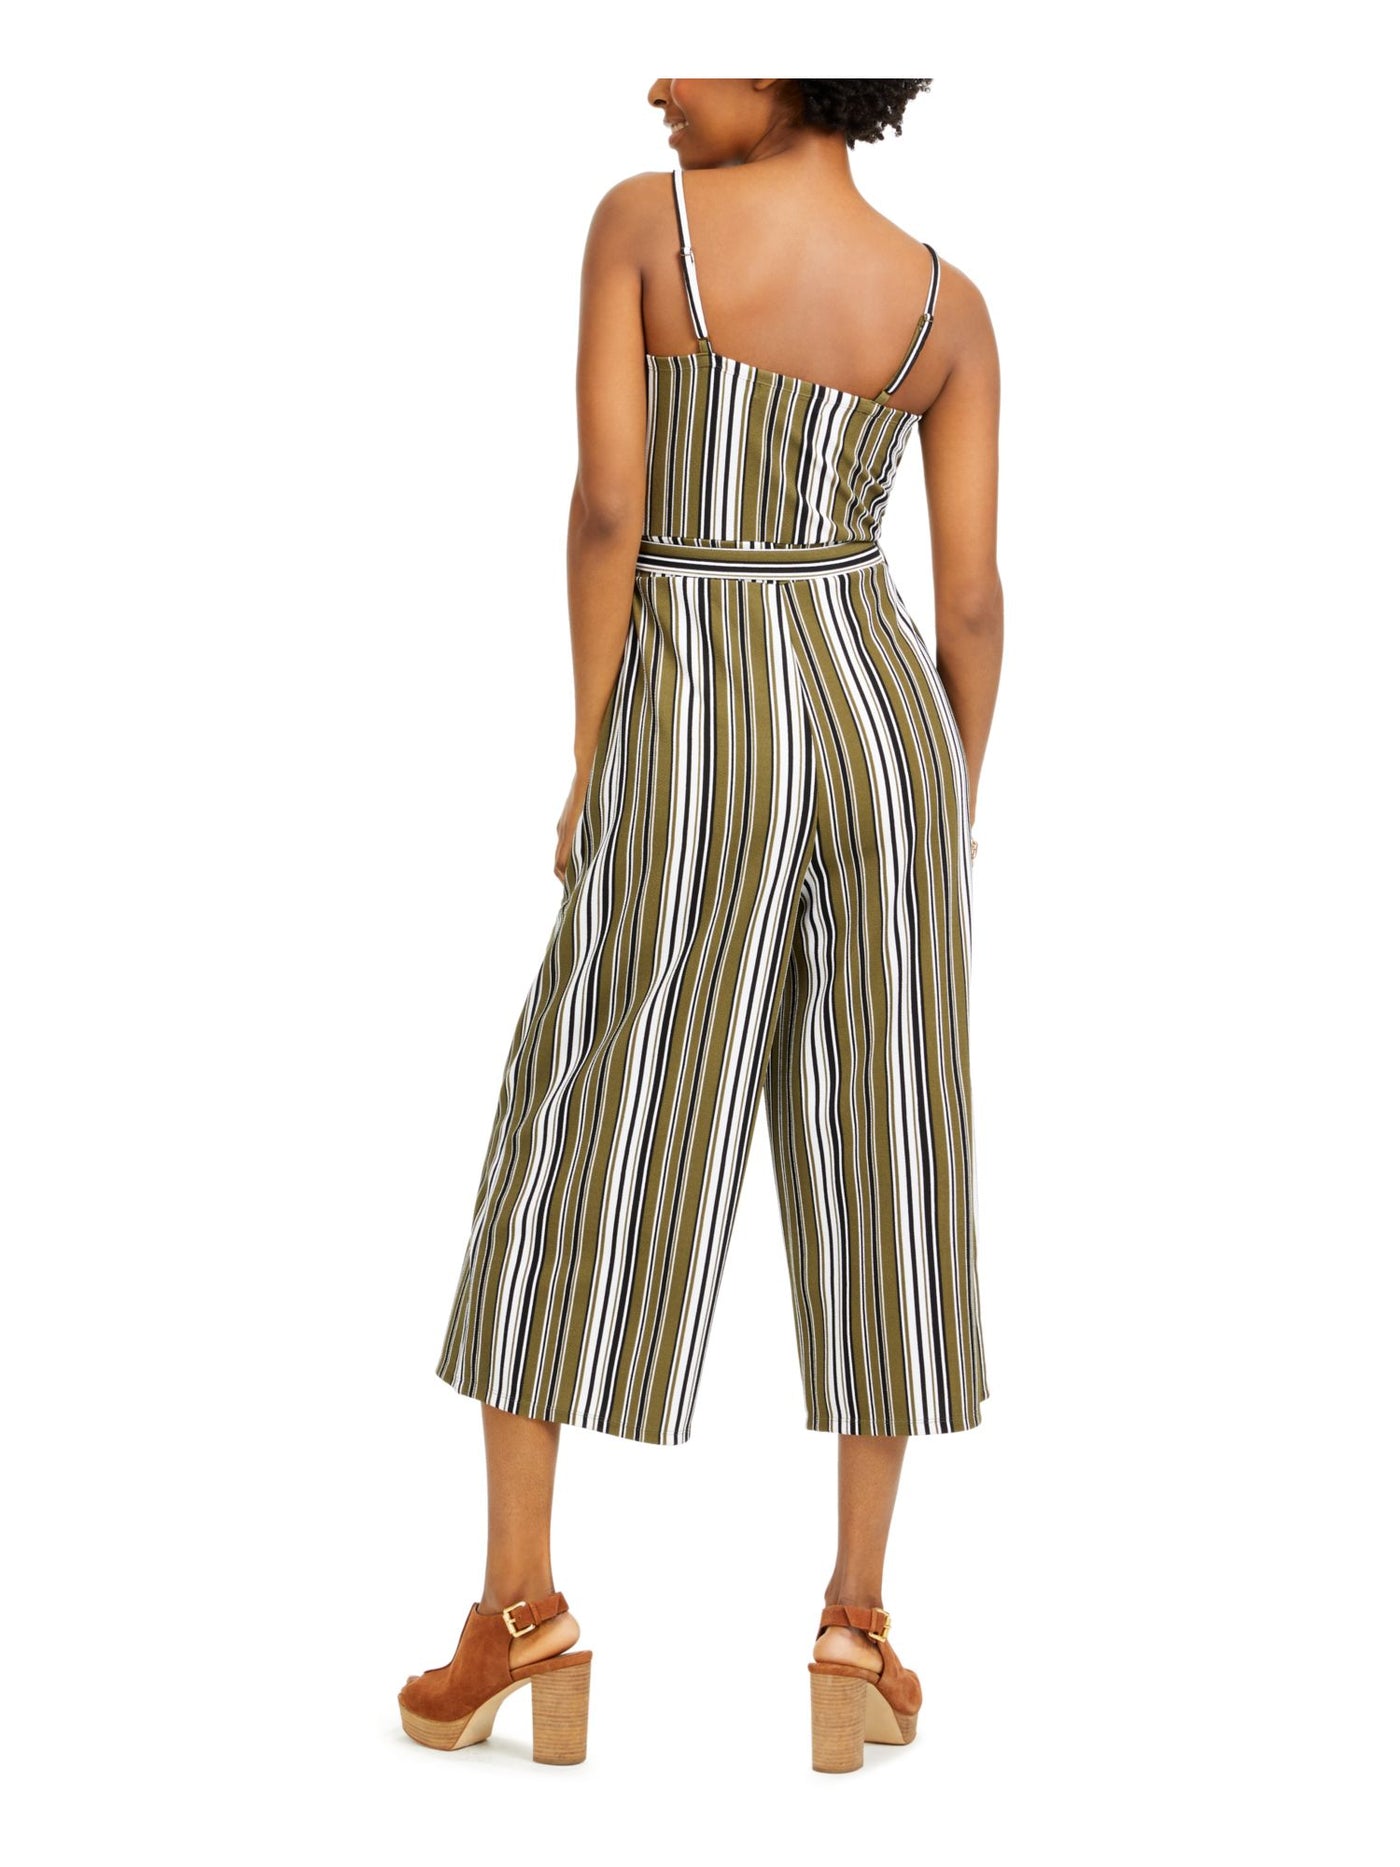 ALMOST FAMOUS Womens Green Belted Striped Spaghetti Strap Sweetheart Neckline Wide Leg Jumpsuit Juniors L